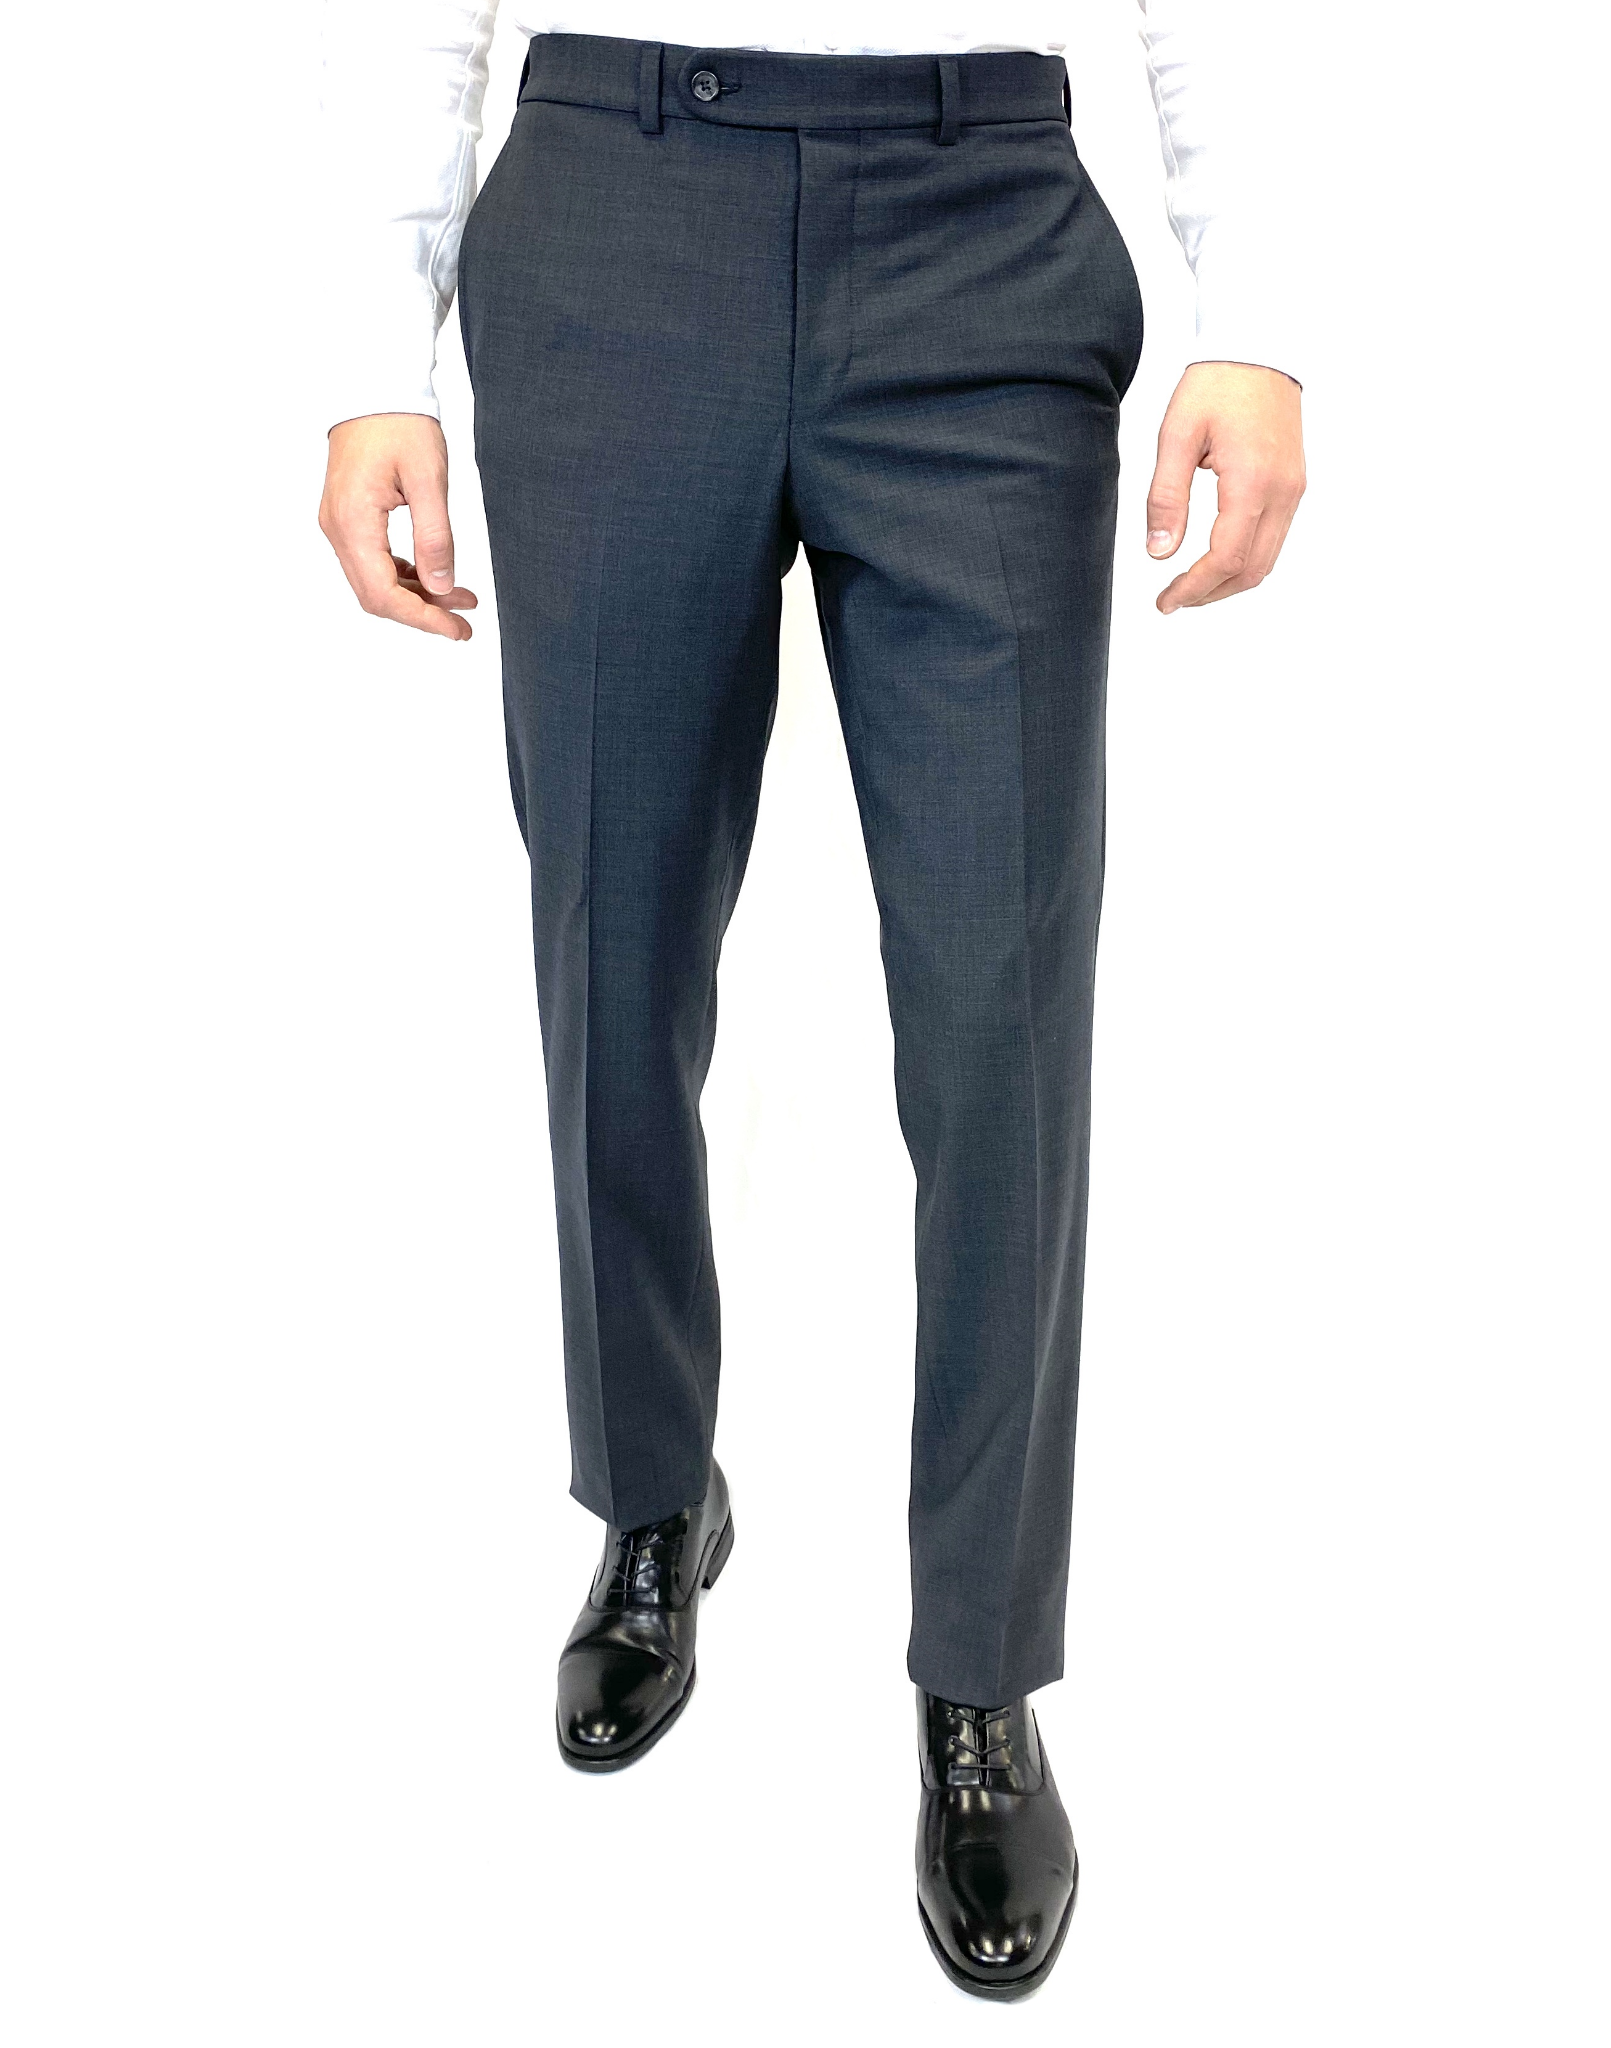 Riviera Classic Fit Traveler Dress Pant in Charcoal